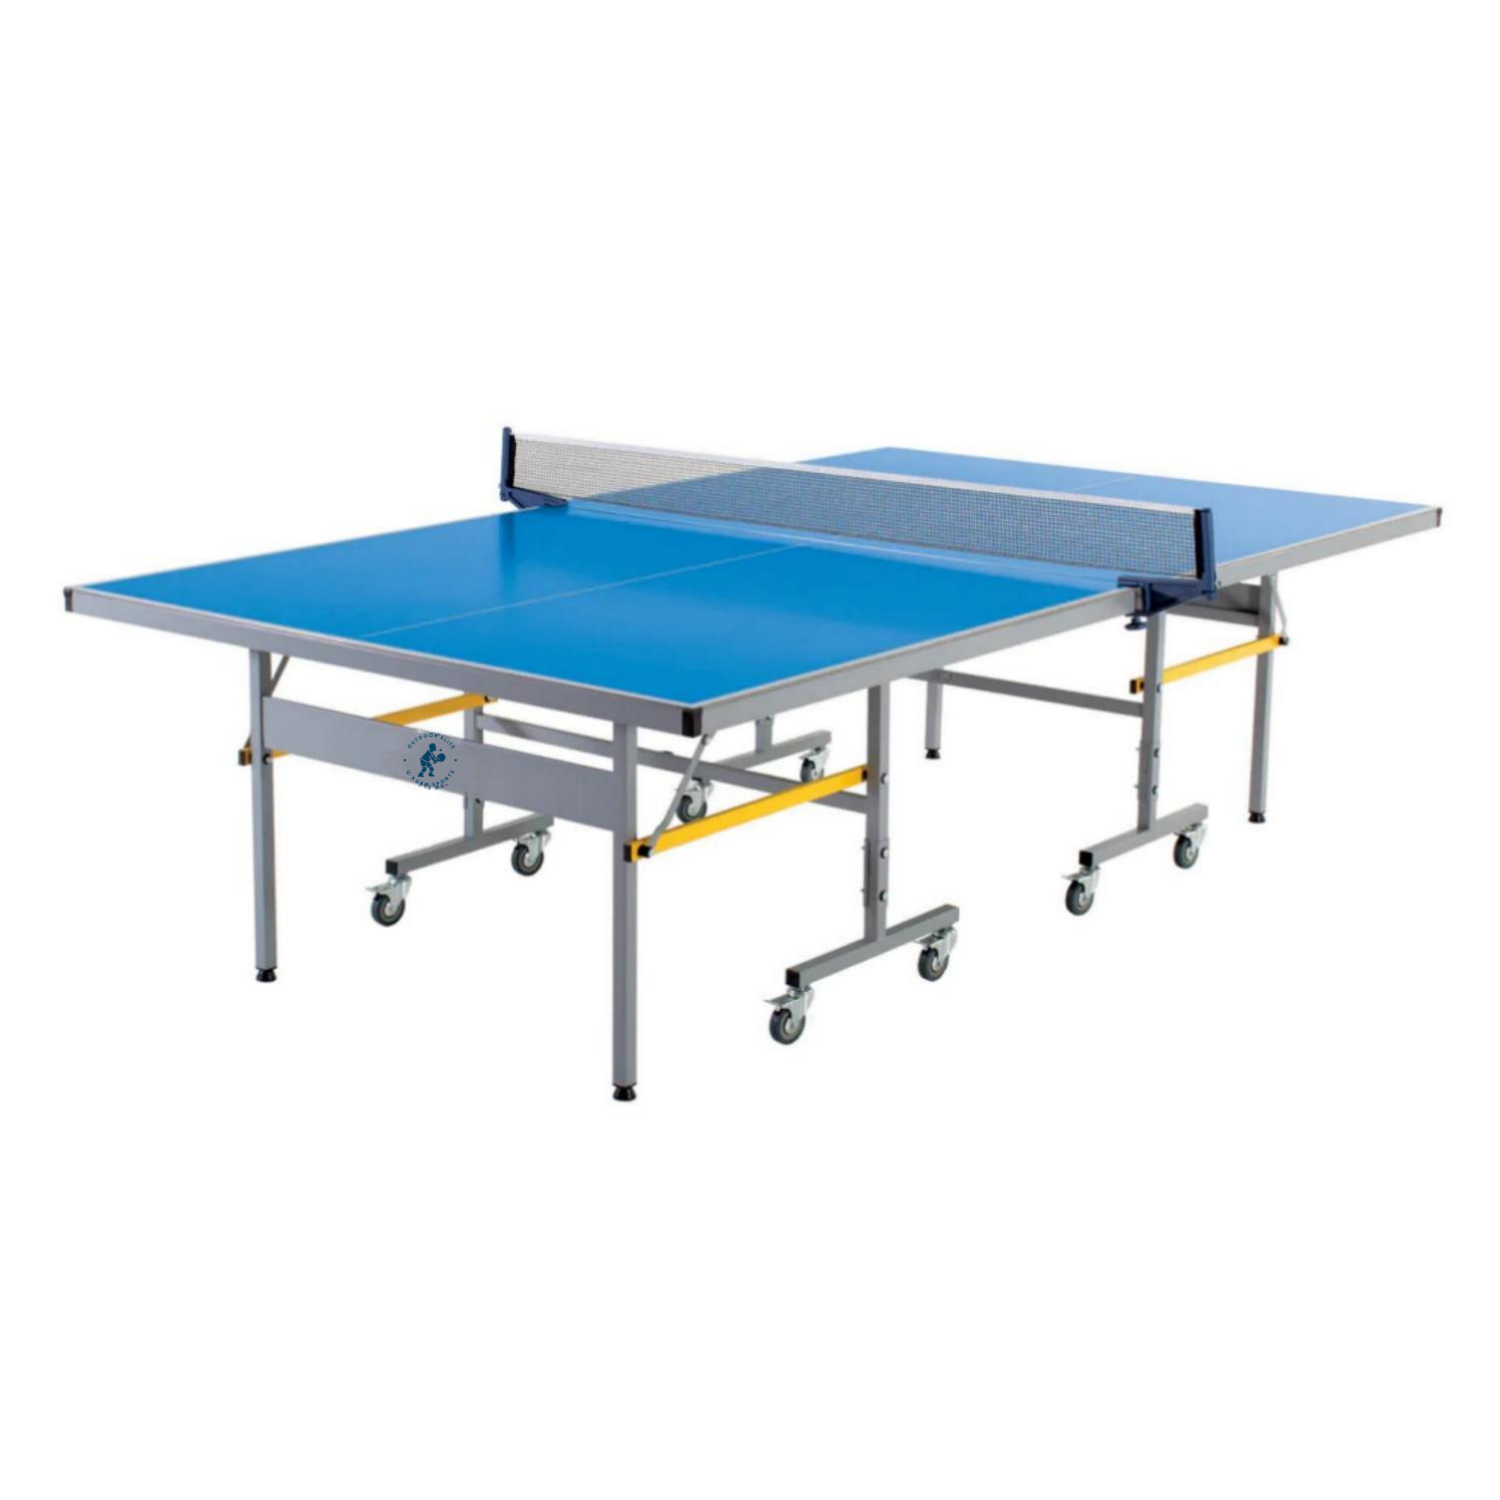 Outdoor Elite Table Tennis Table- 10-minute QuickPlay